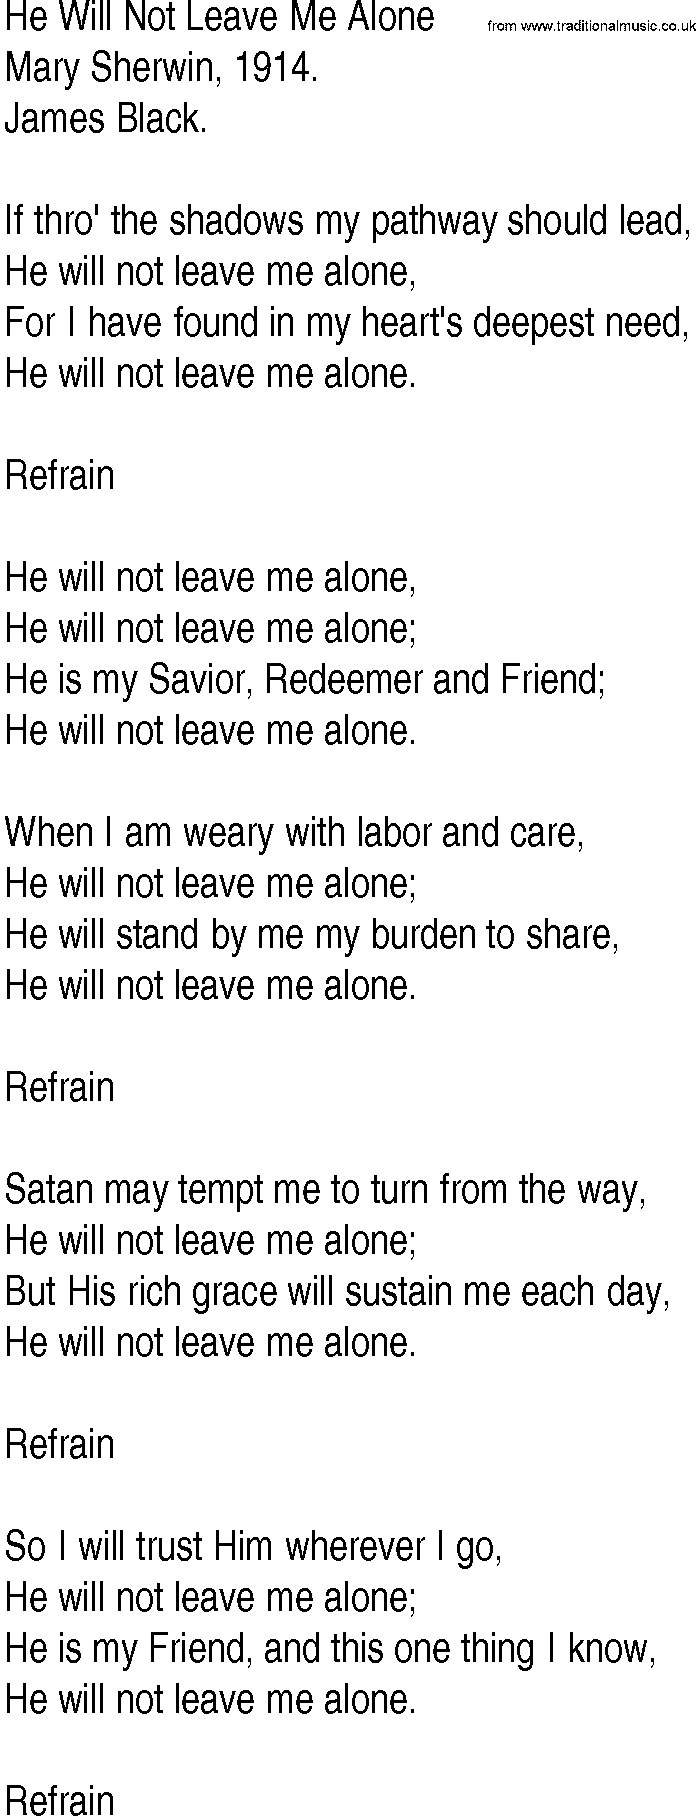 Hymn and Gospel Song: He Will Not Leave Me Alone by Mary Sherwin lyrics